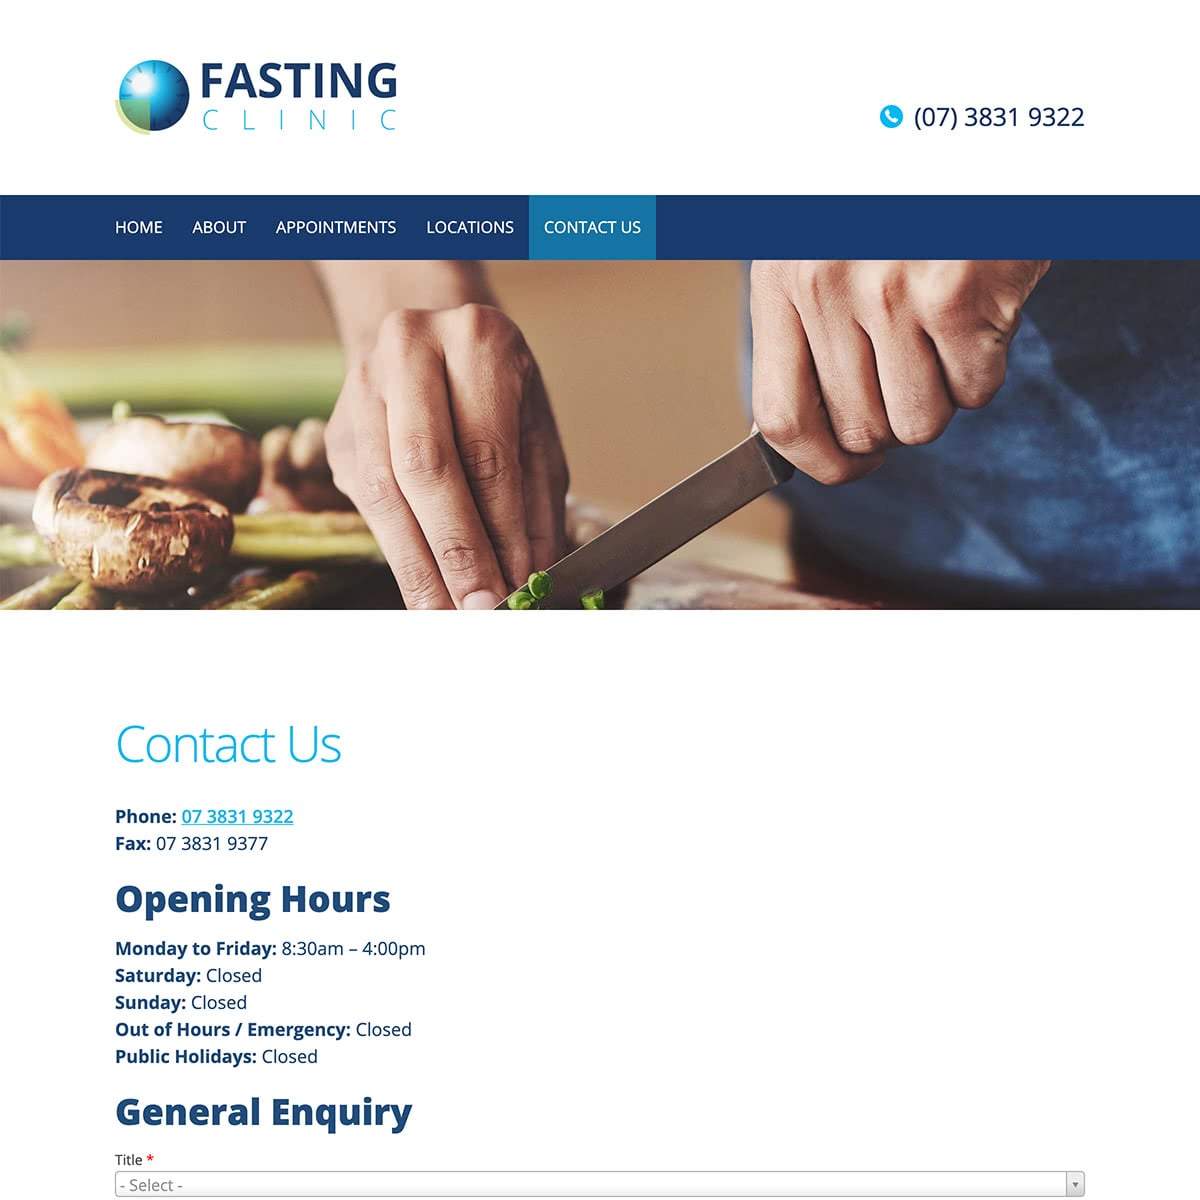 Fasting Clinic - Contact Us